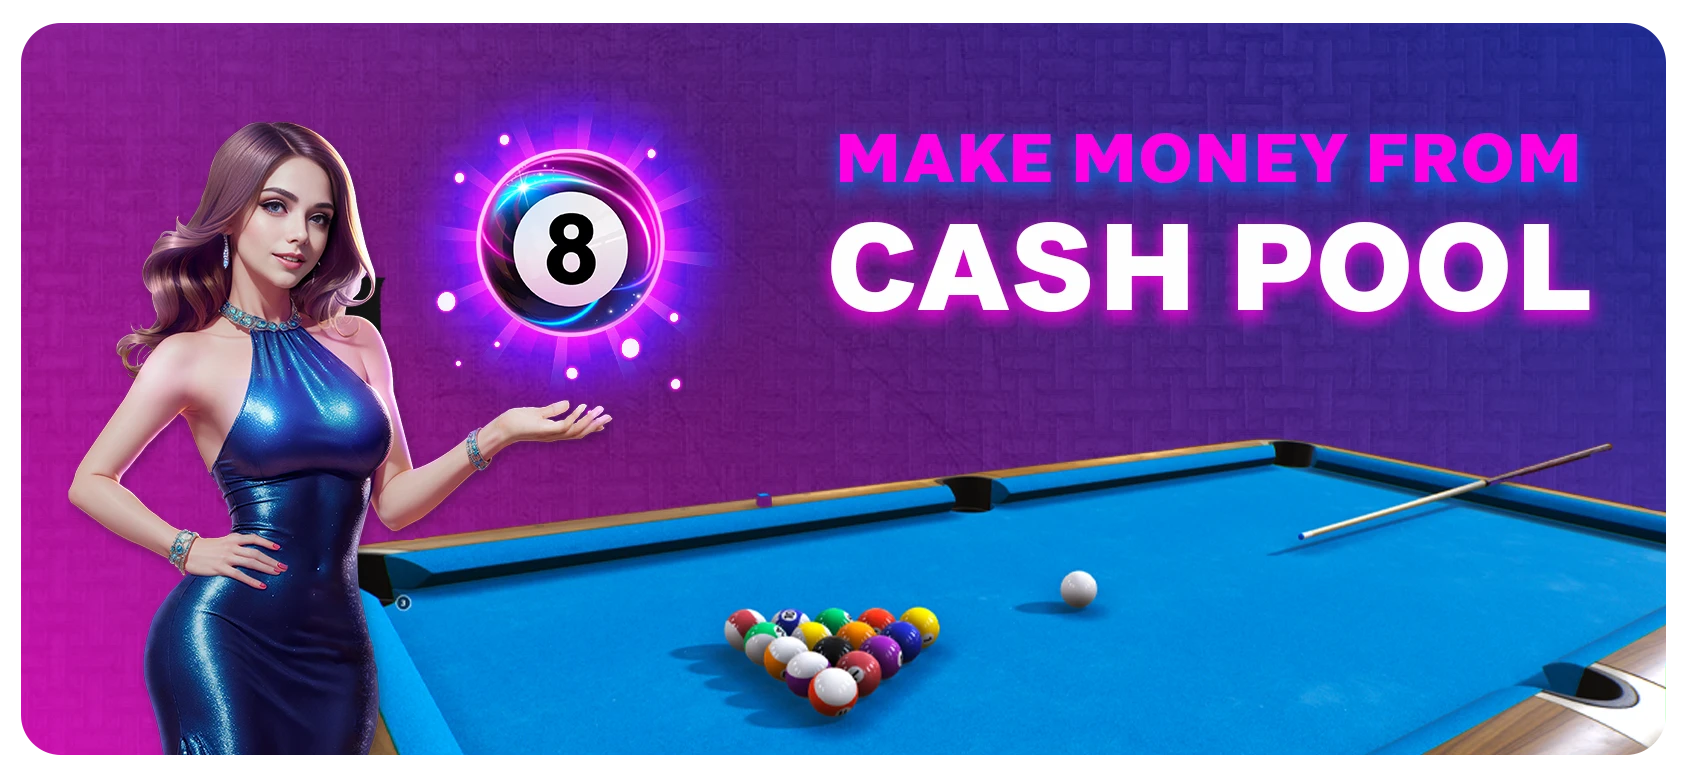 Pool Hall with Friendly Atmosphere for Billiards Fun | Main Event